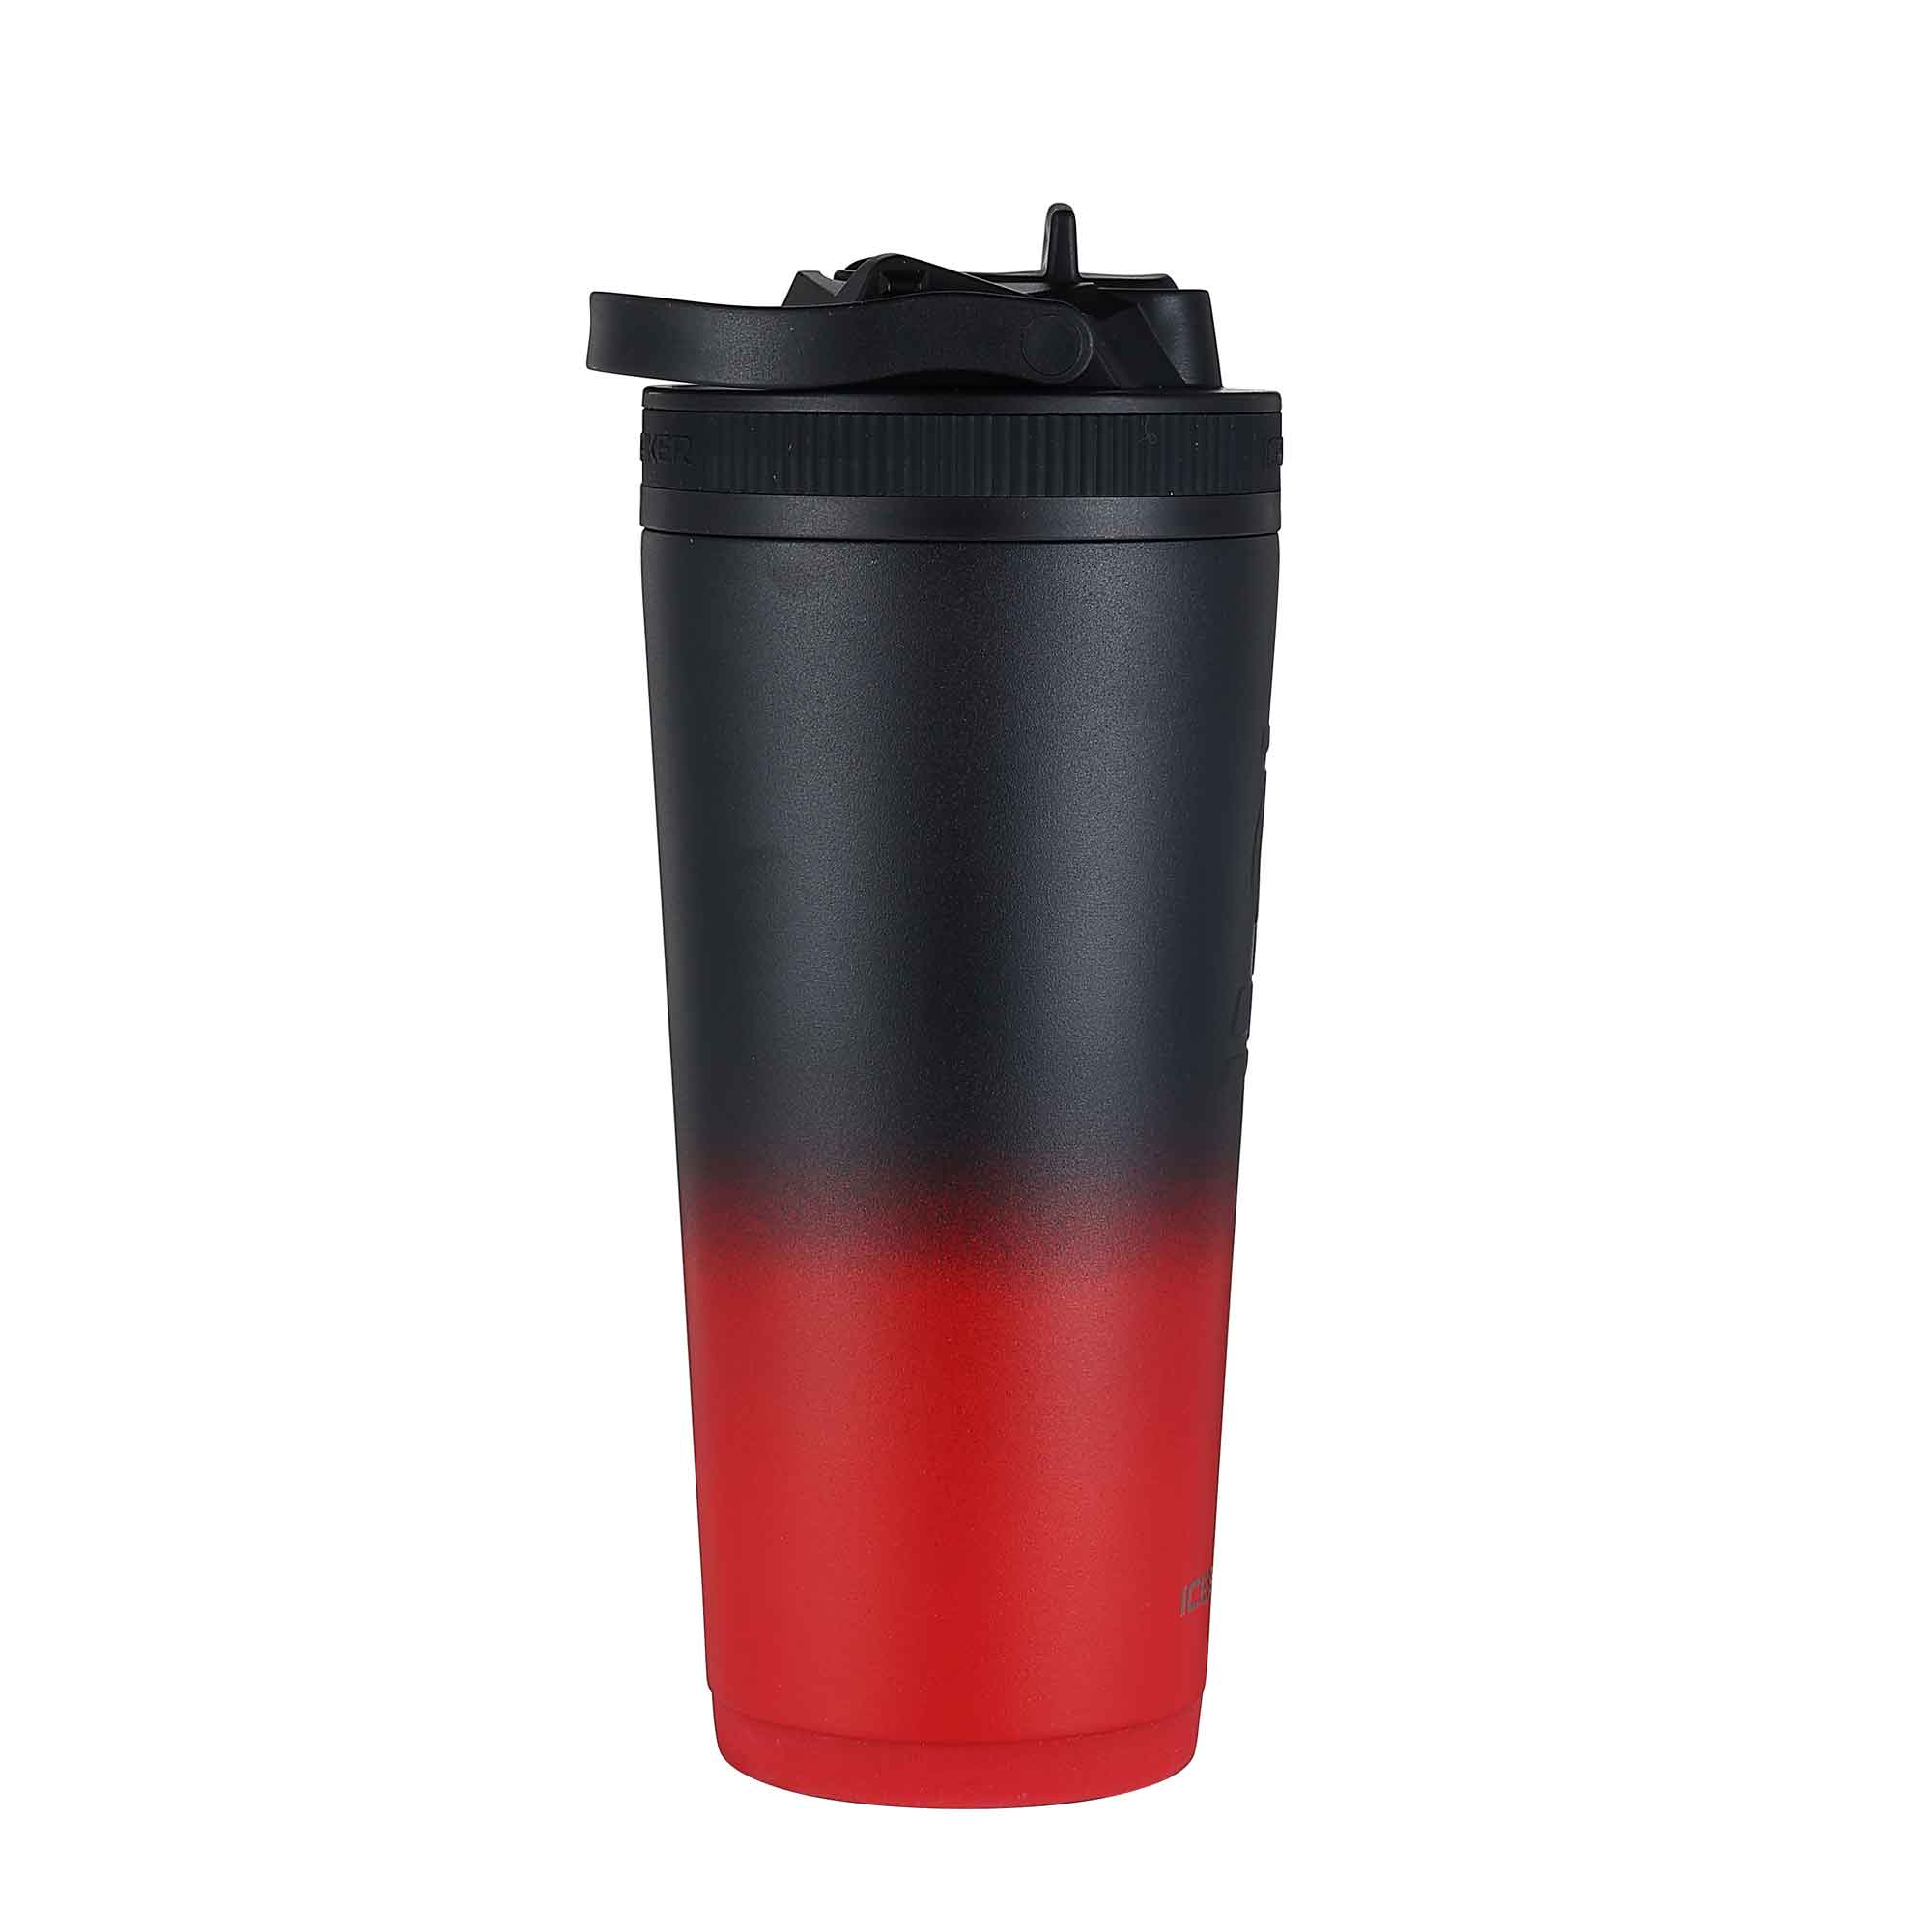 EQARD 30 oz Tumbler with Handle Straw Cup Travel Mug with Leakproof Lid  Vacuum Insulated Stainless S…See more EQARD 30 oz Tumbler with Handle Straw